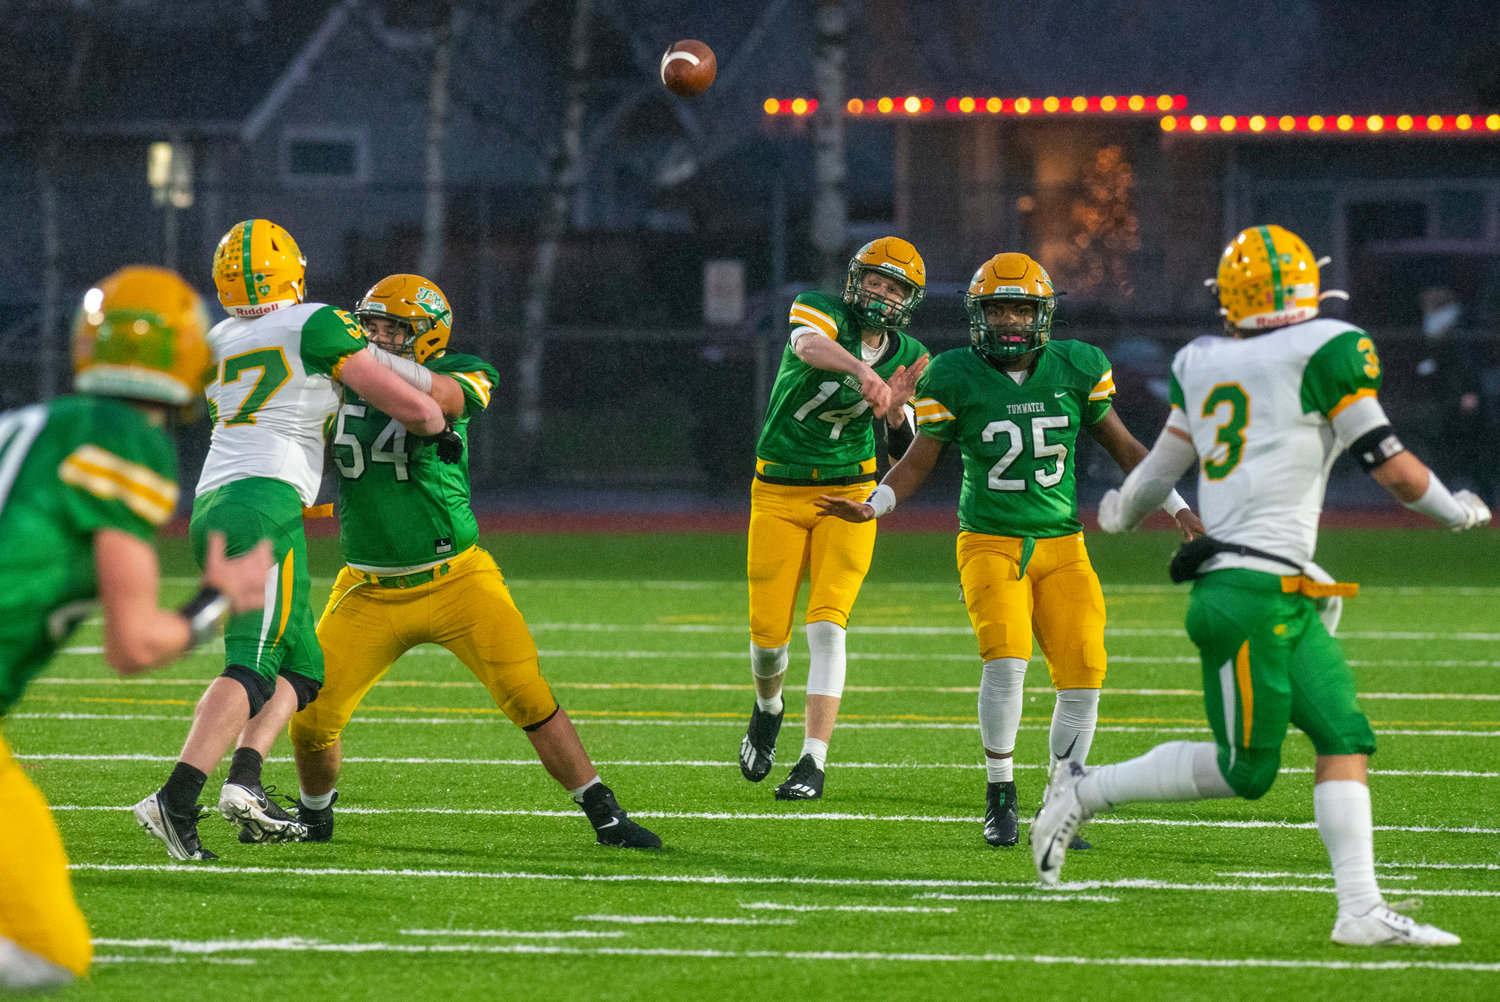 Tumwater’s Alex Overbay (14) tosses a pass downfield against Lynden during the 2A state title game on Dec. 4.